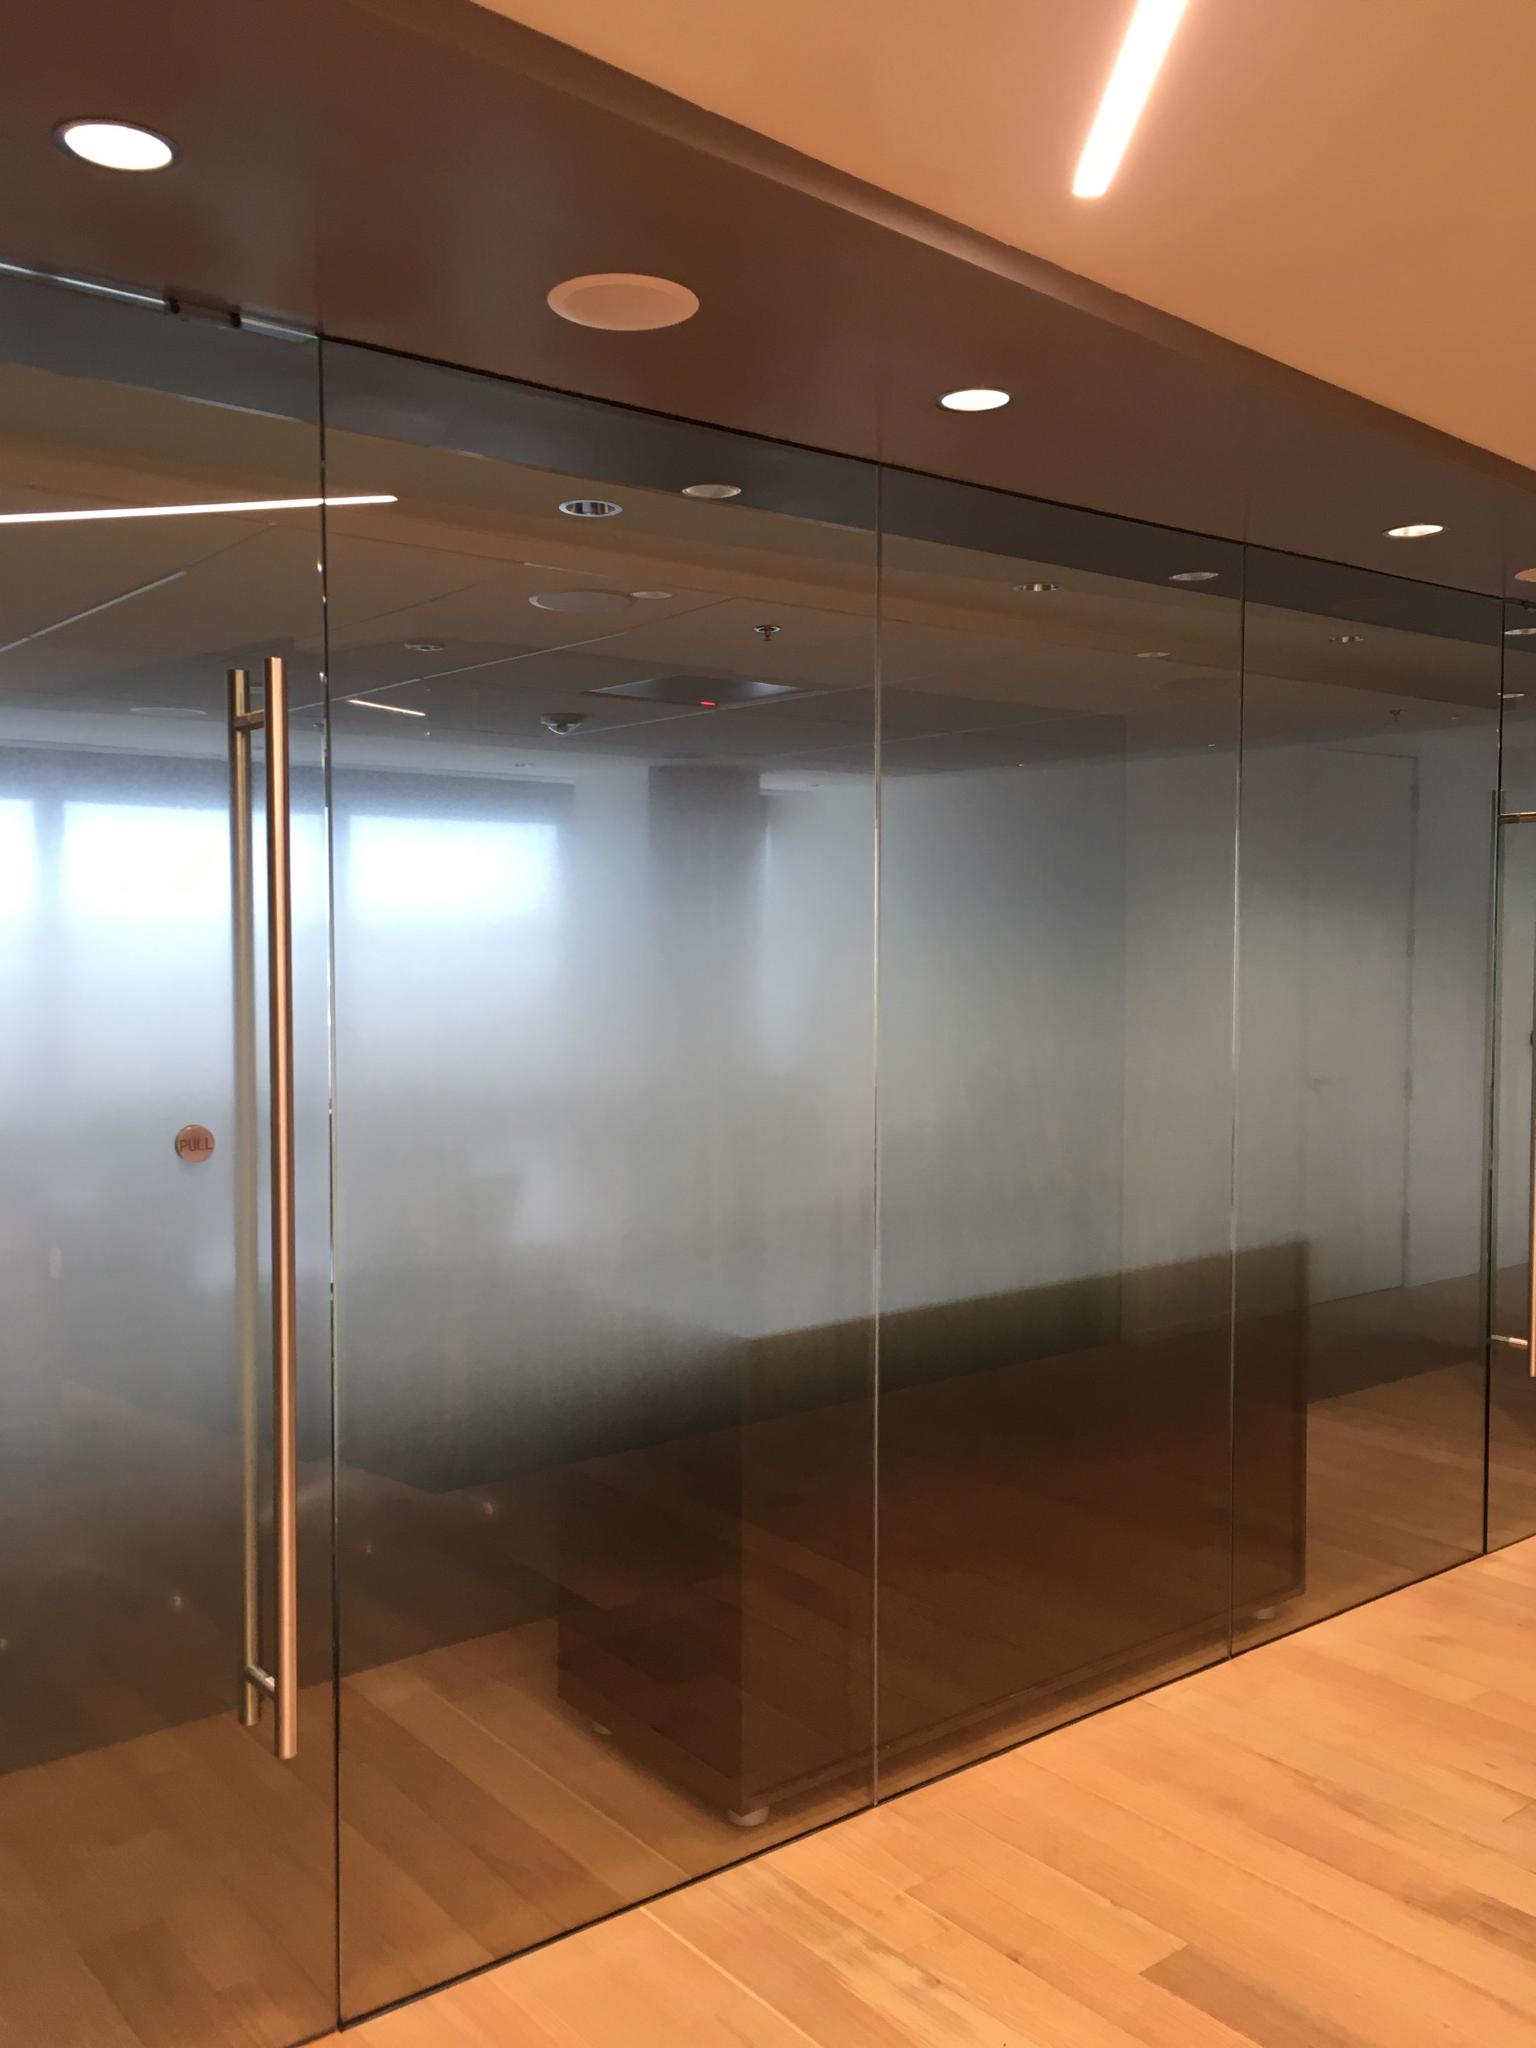 Faded glass effect on office windows